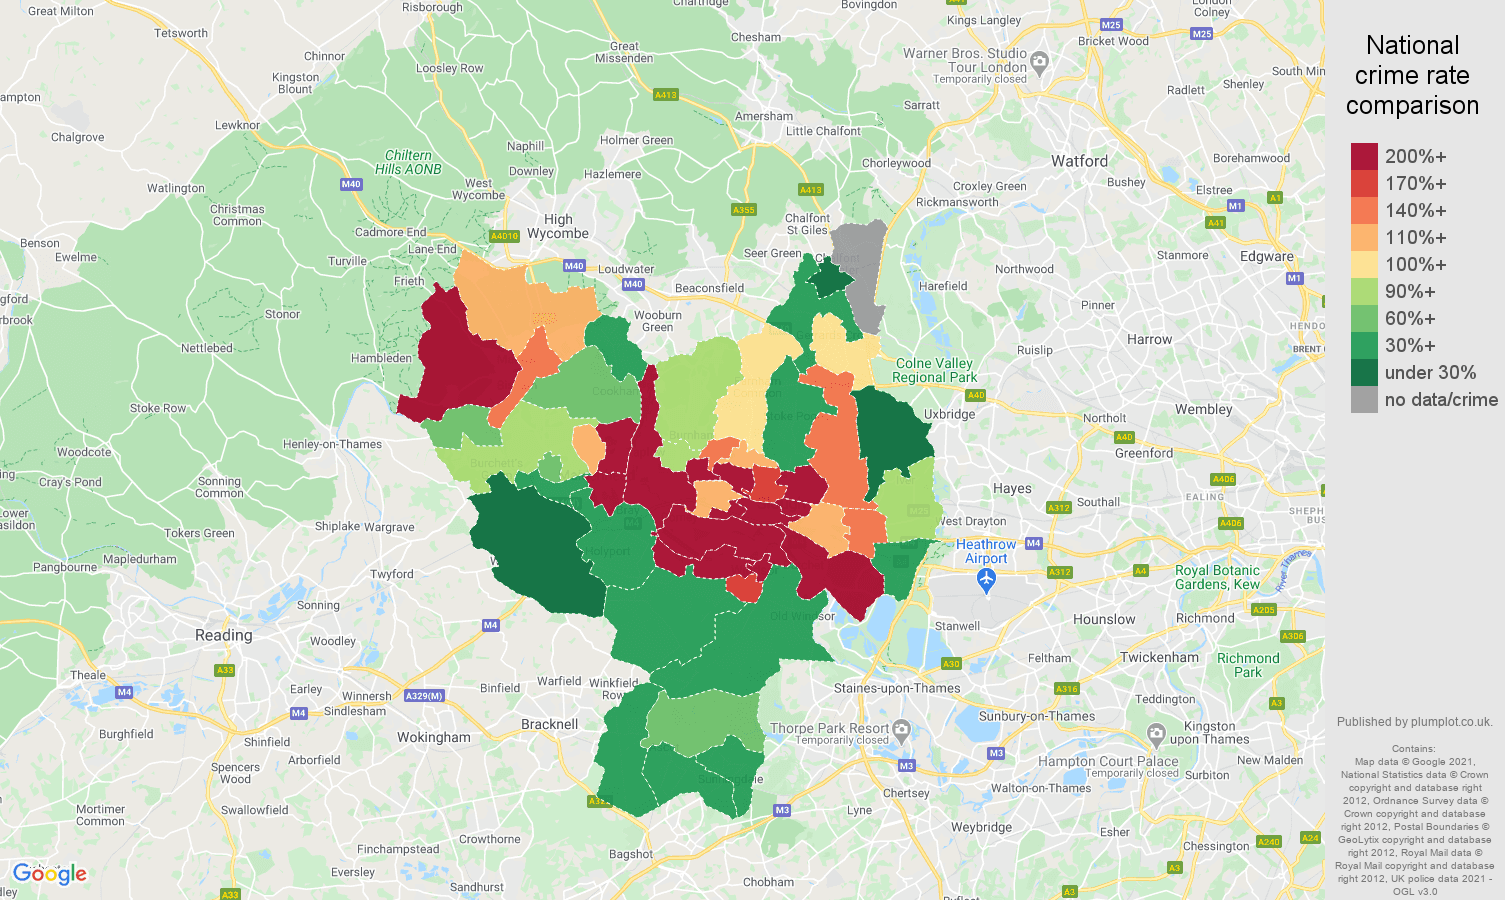 Slough bicycle theft crime rate comparison map